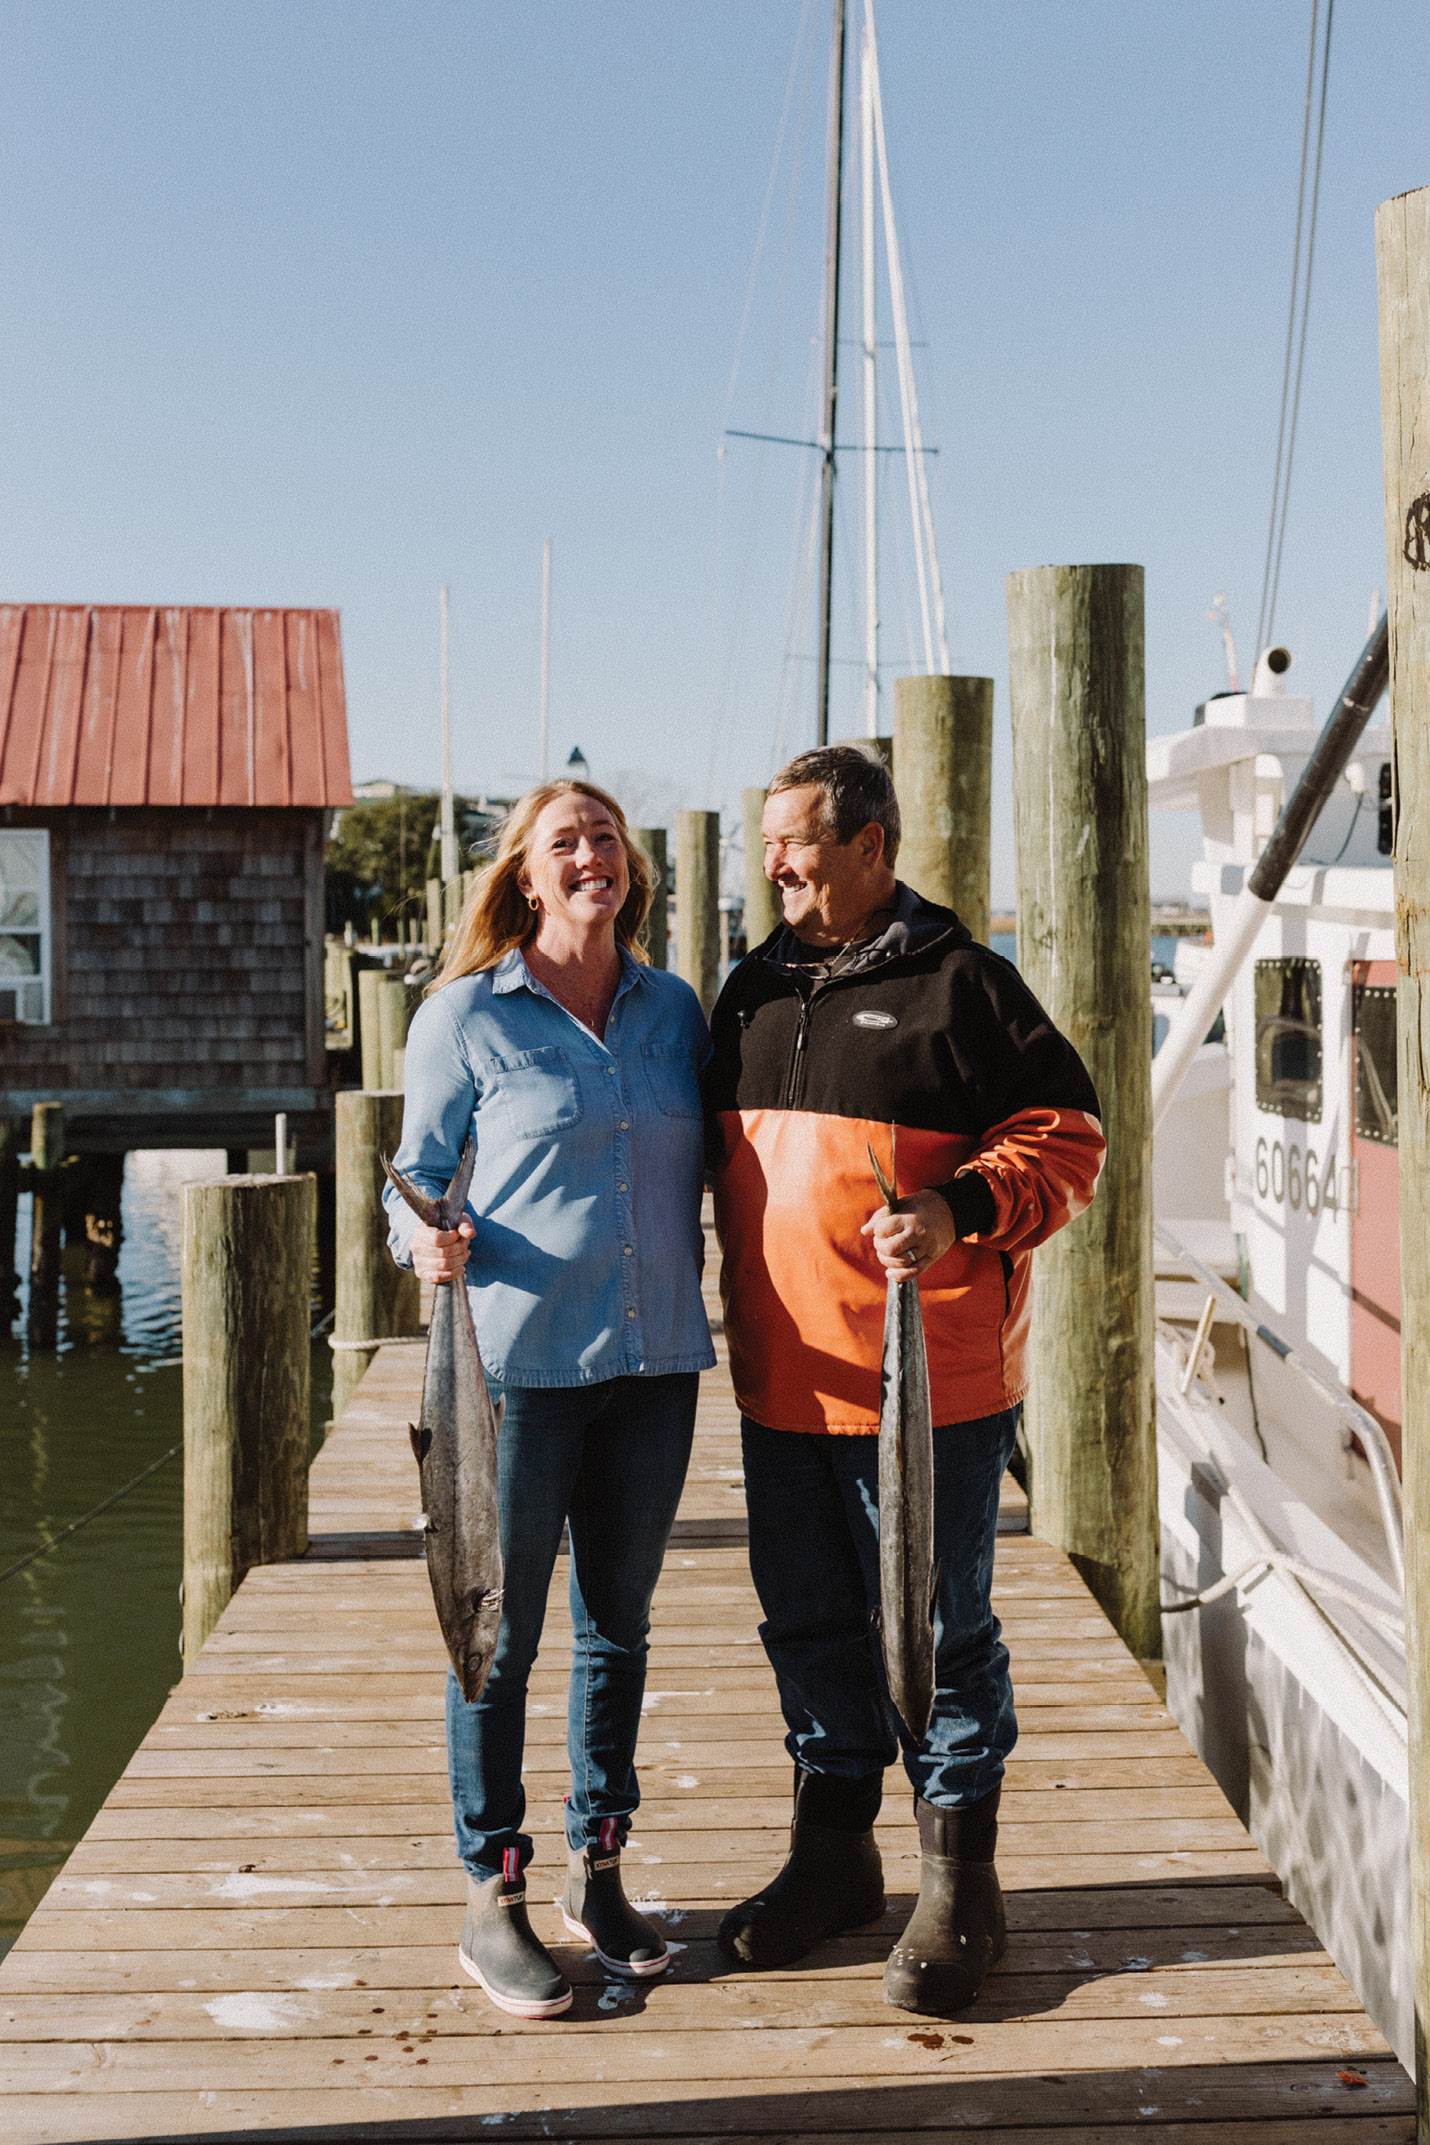 With decades of involvement in fishery management, the Marhefkas are committed to working with scientists to ensure long-term sustainability of wild fish stocks. They aim to help spread the word of alternate catches at Abundant Seafood’s new market on Mixson Avenue (opening March 2020).